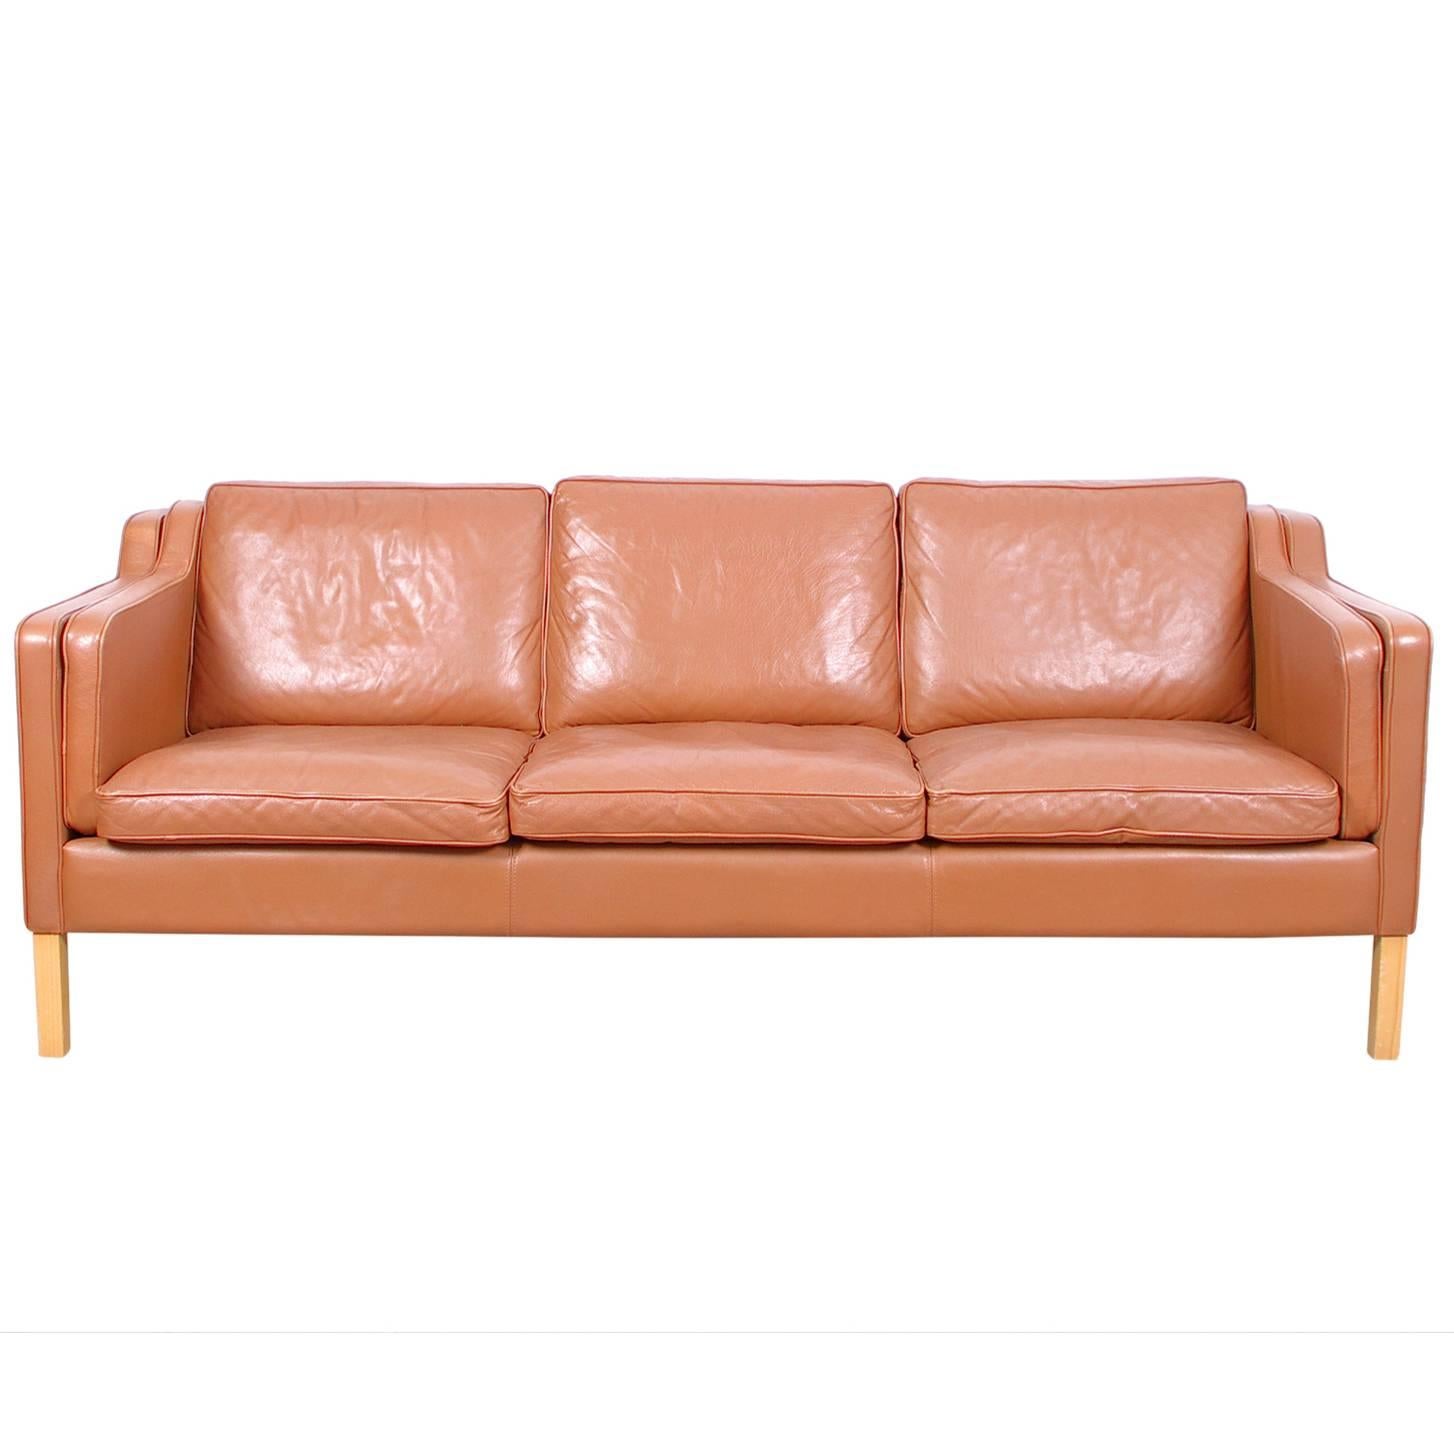 Vintage Danish Leather Three-Seat Sofa by Stouby